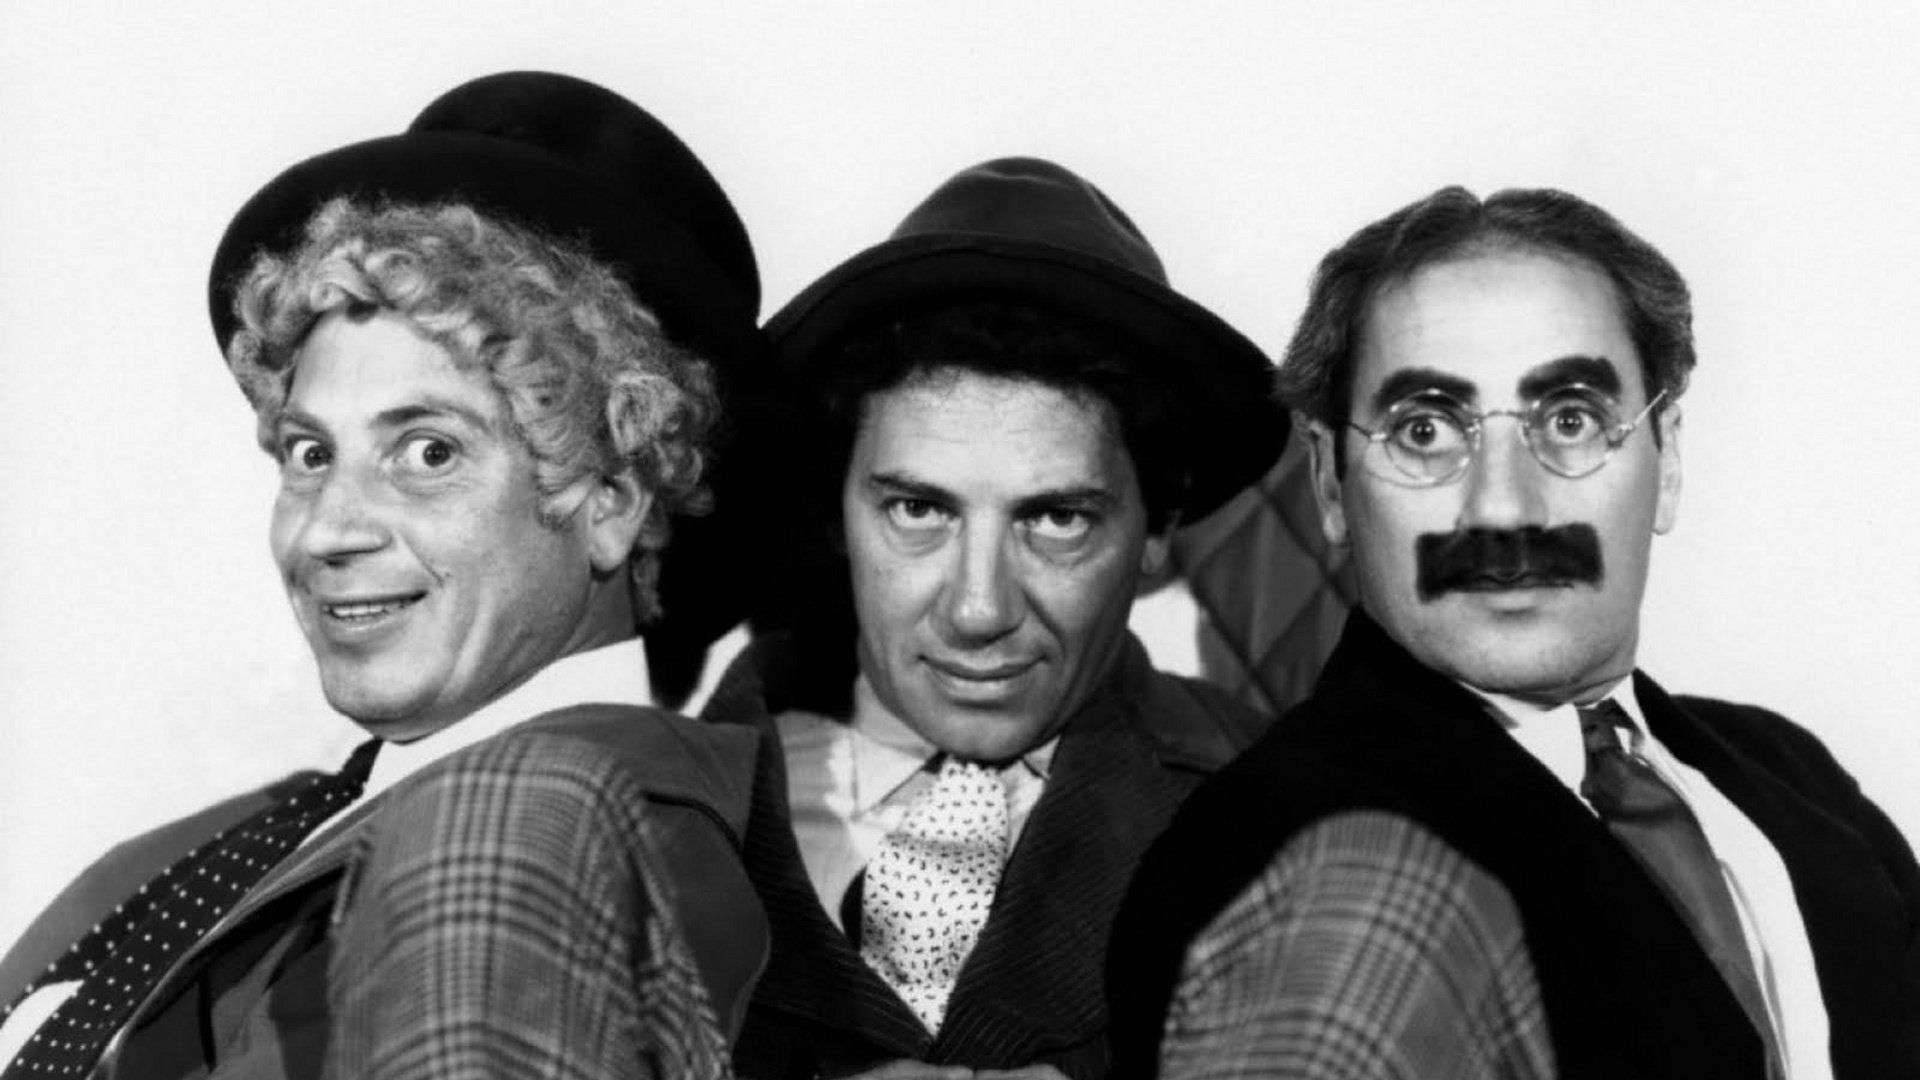 Marxbrothers Porträts In Nahaufnahme Wallpaper